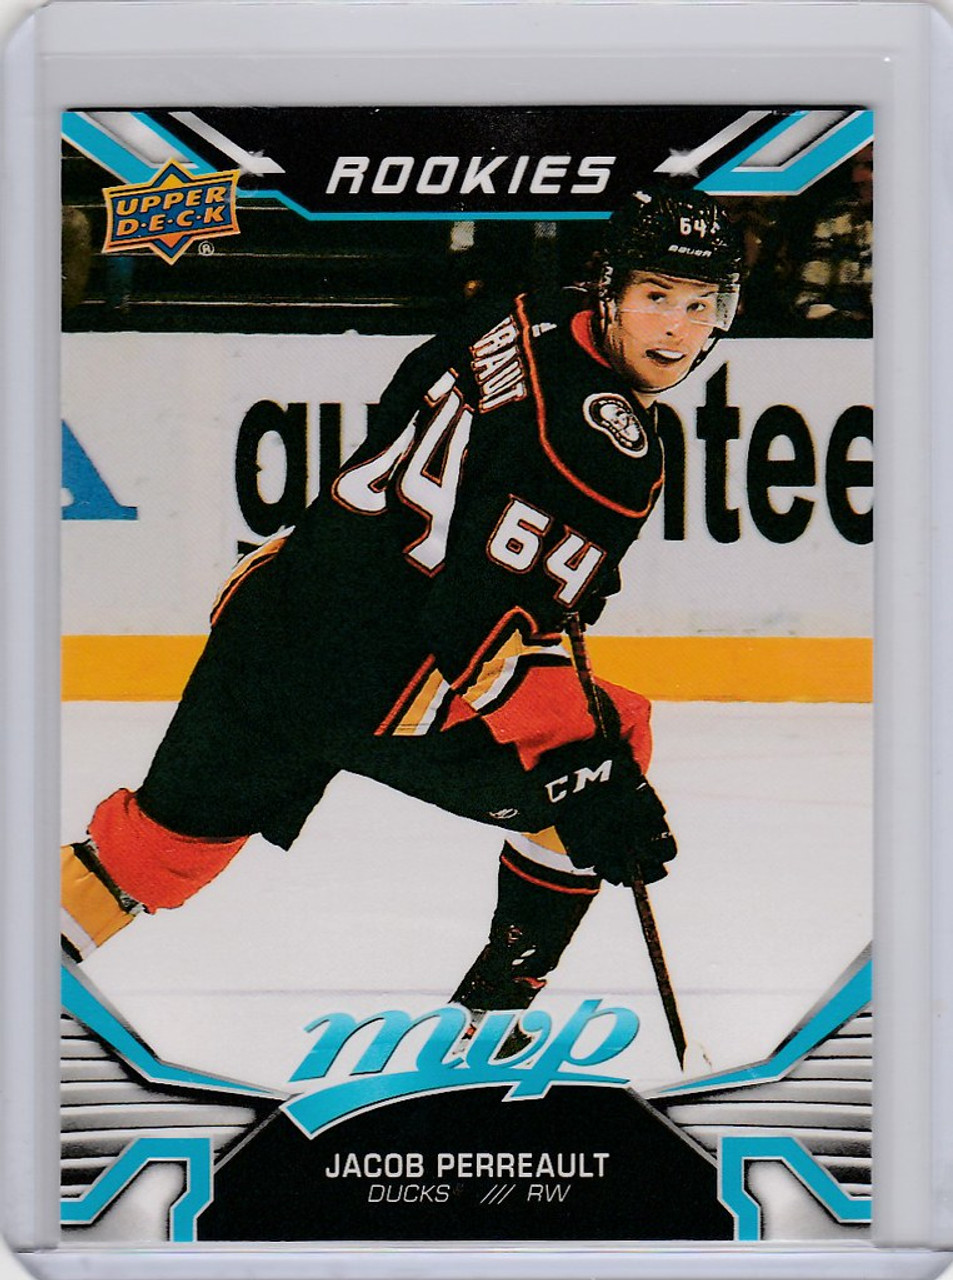  2022-23 Upper Deck AHL #75 Jacob Perreault San Diego Gulls  Official American Hockey League Trading Card in Raw (NM or Better)  Condition : Sports & Outdoors